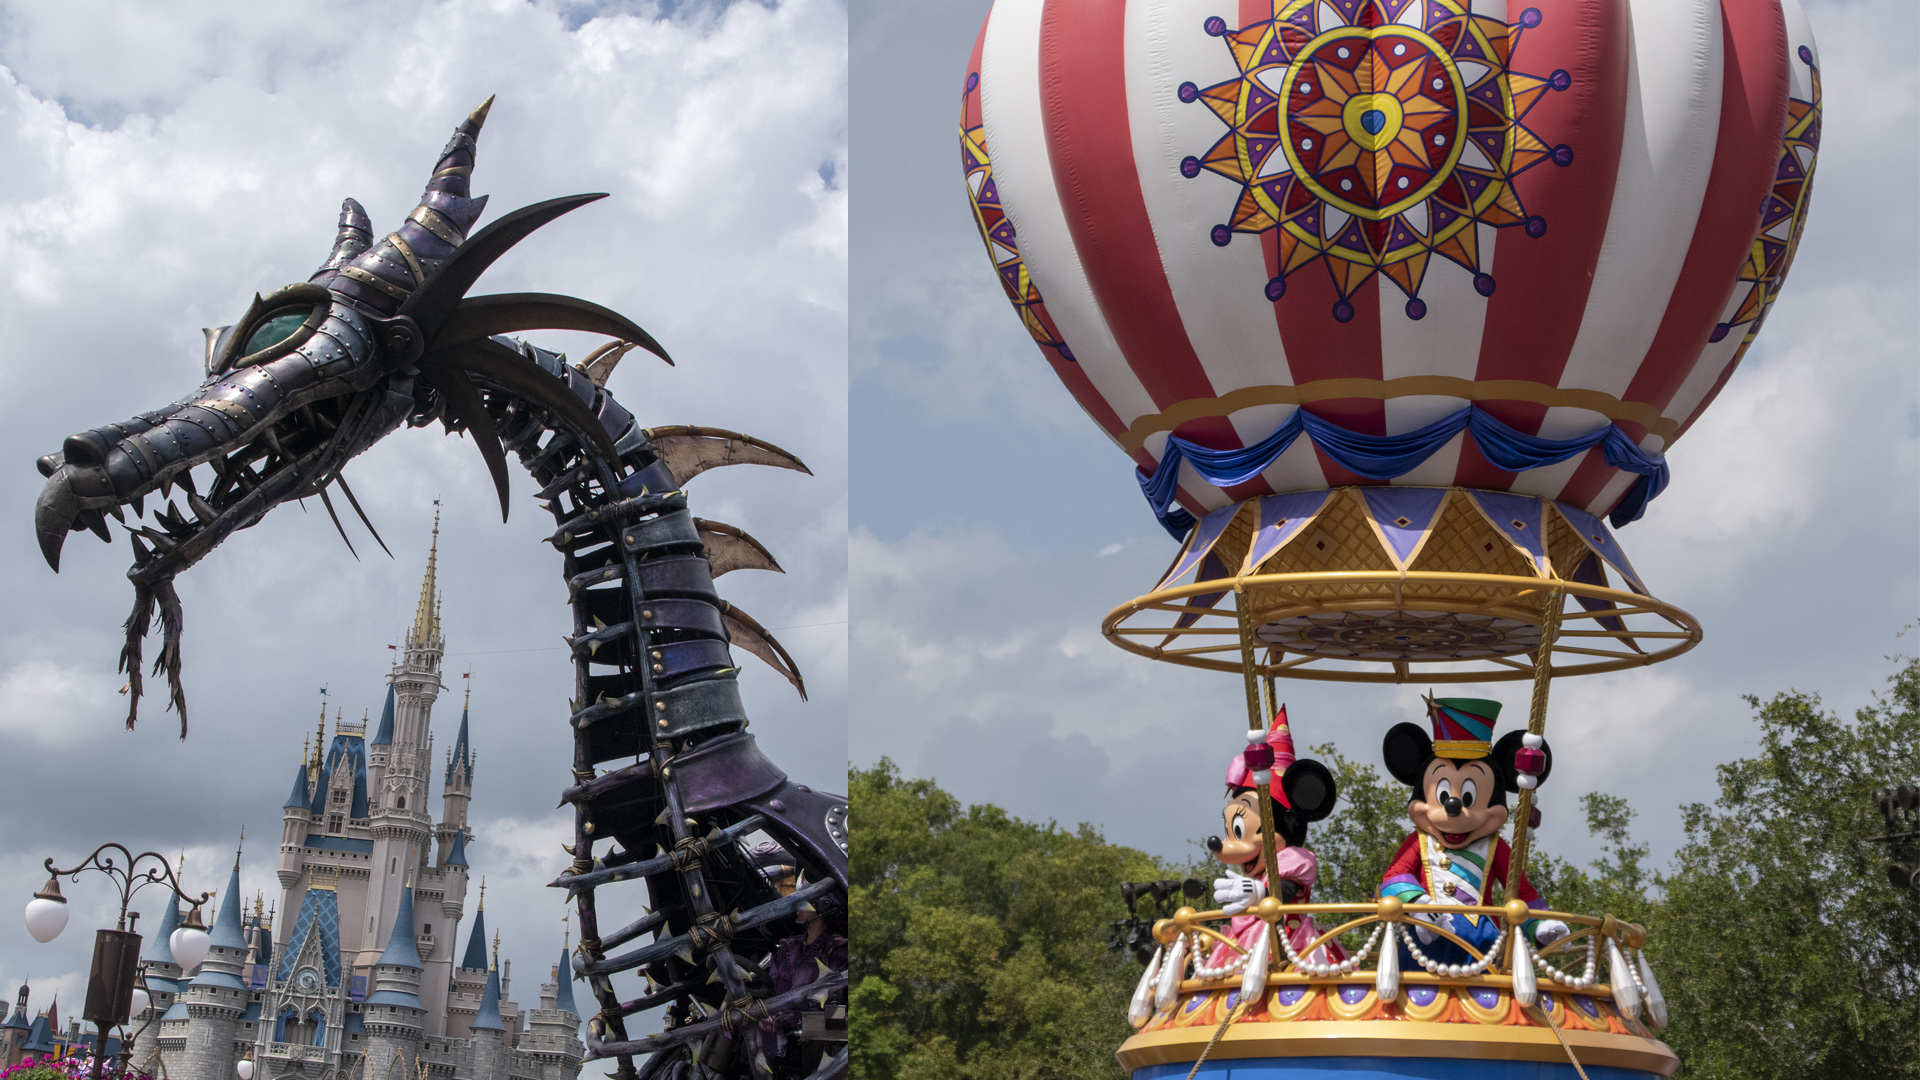 Dates for Returning and New Entertainment at Magic Kingdom Announced including the Festival of Fantasy Parade